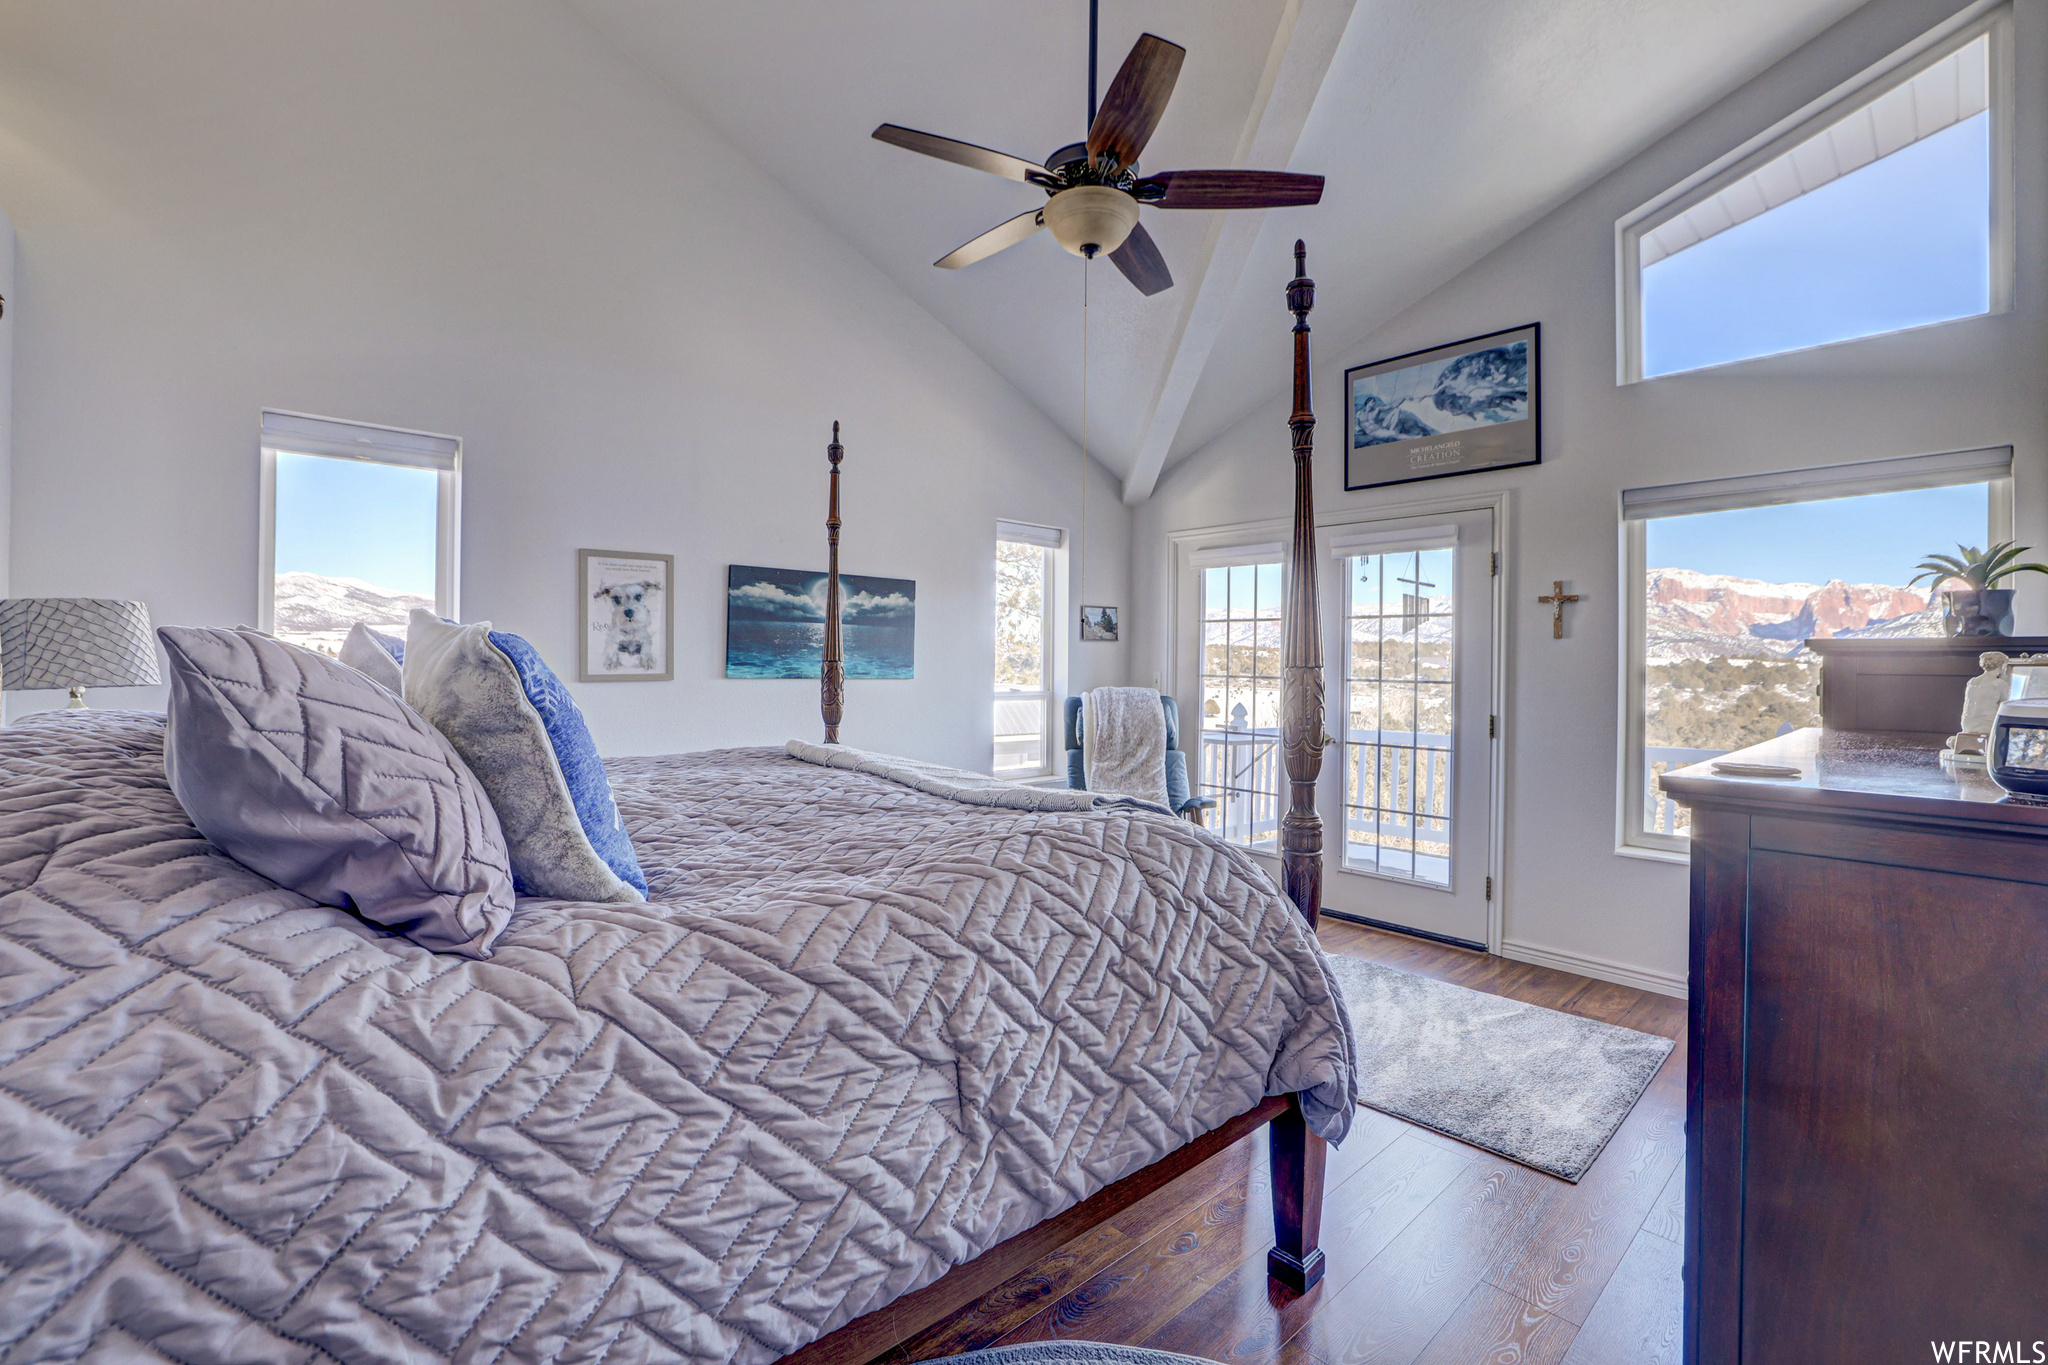 Bedroom featuring multiple windows, access to outside, light hardwood / wood-style flooring, high vaulted ceiling, and ceiling fan